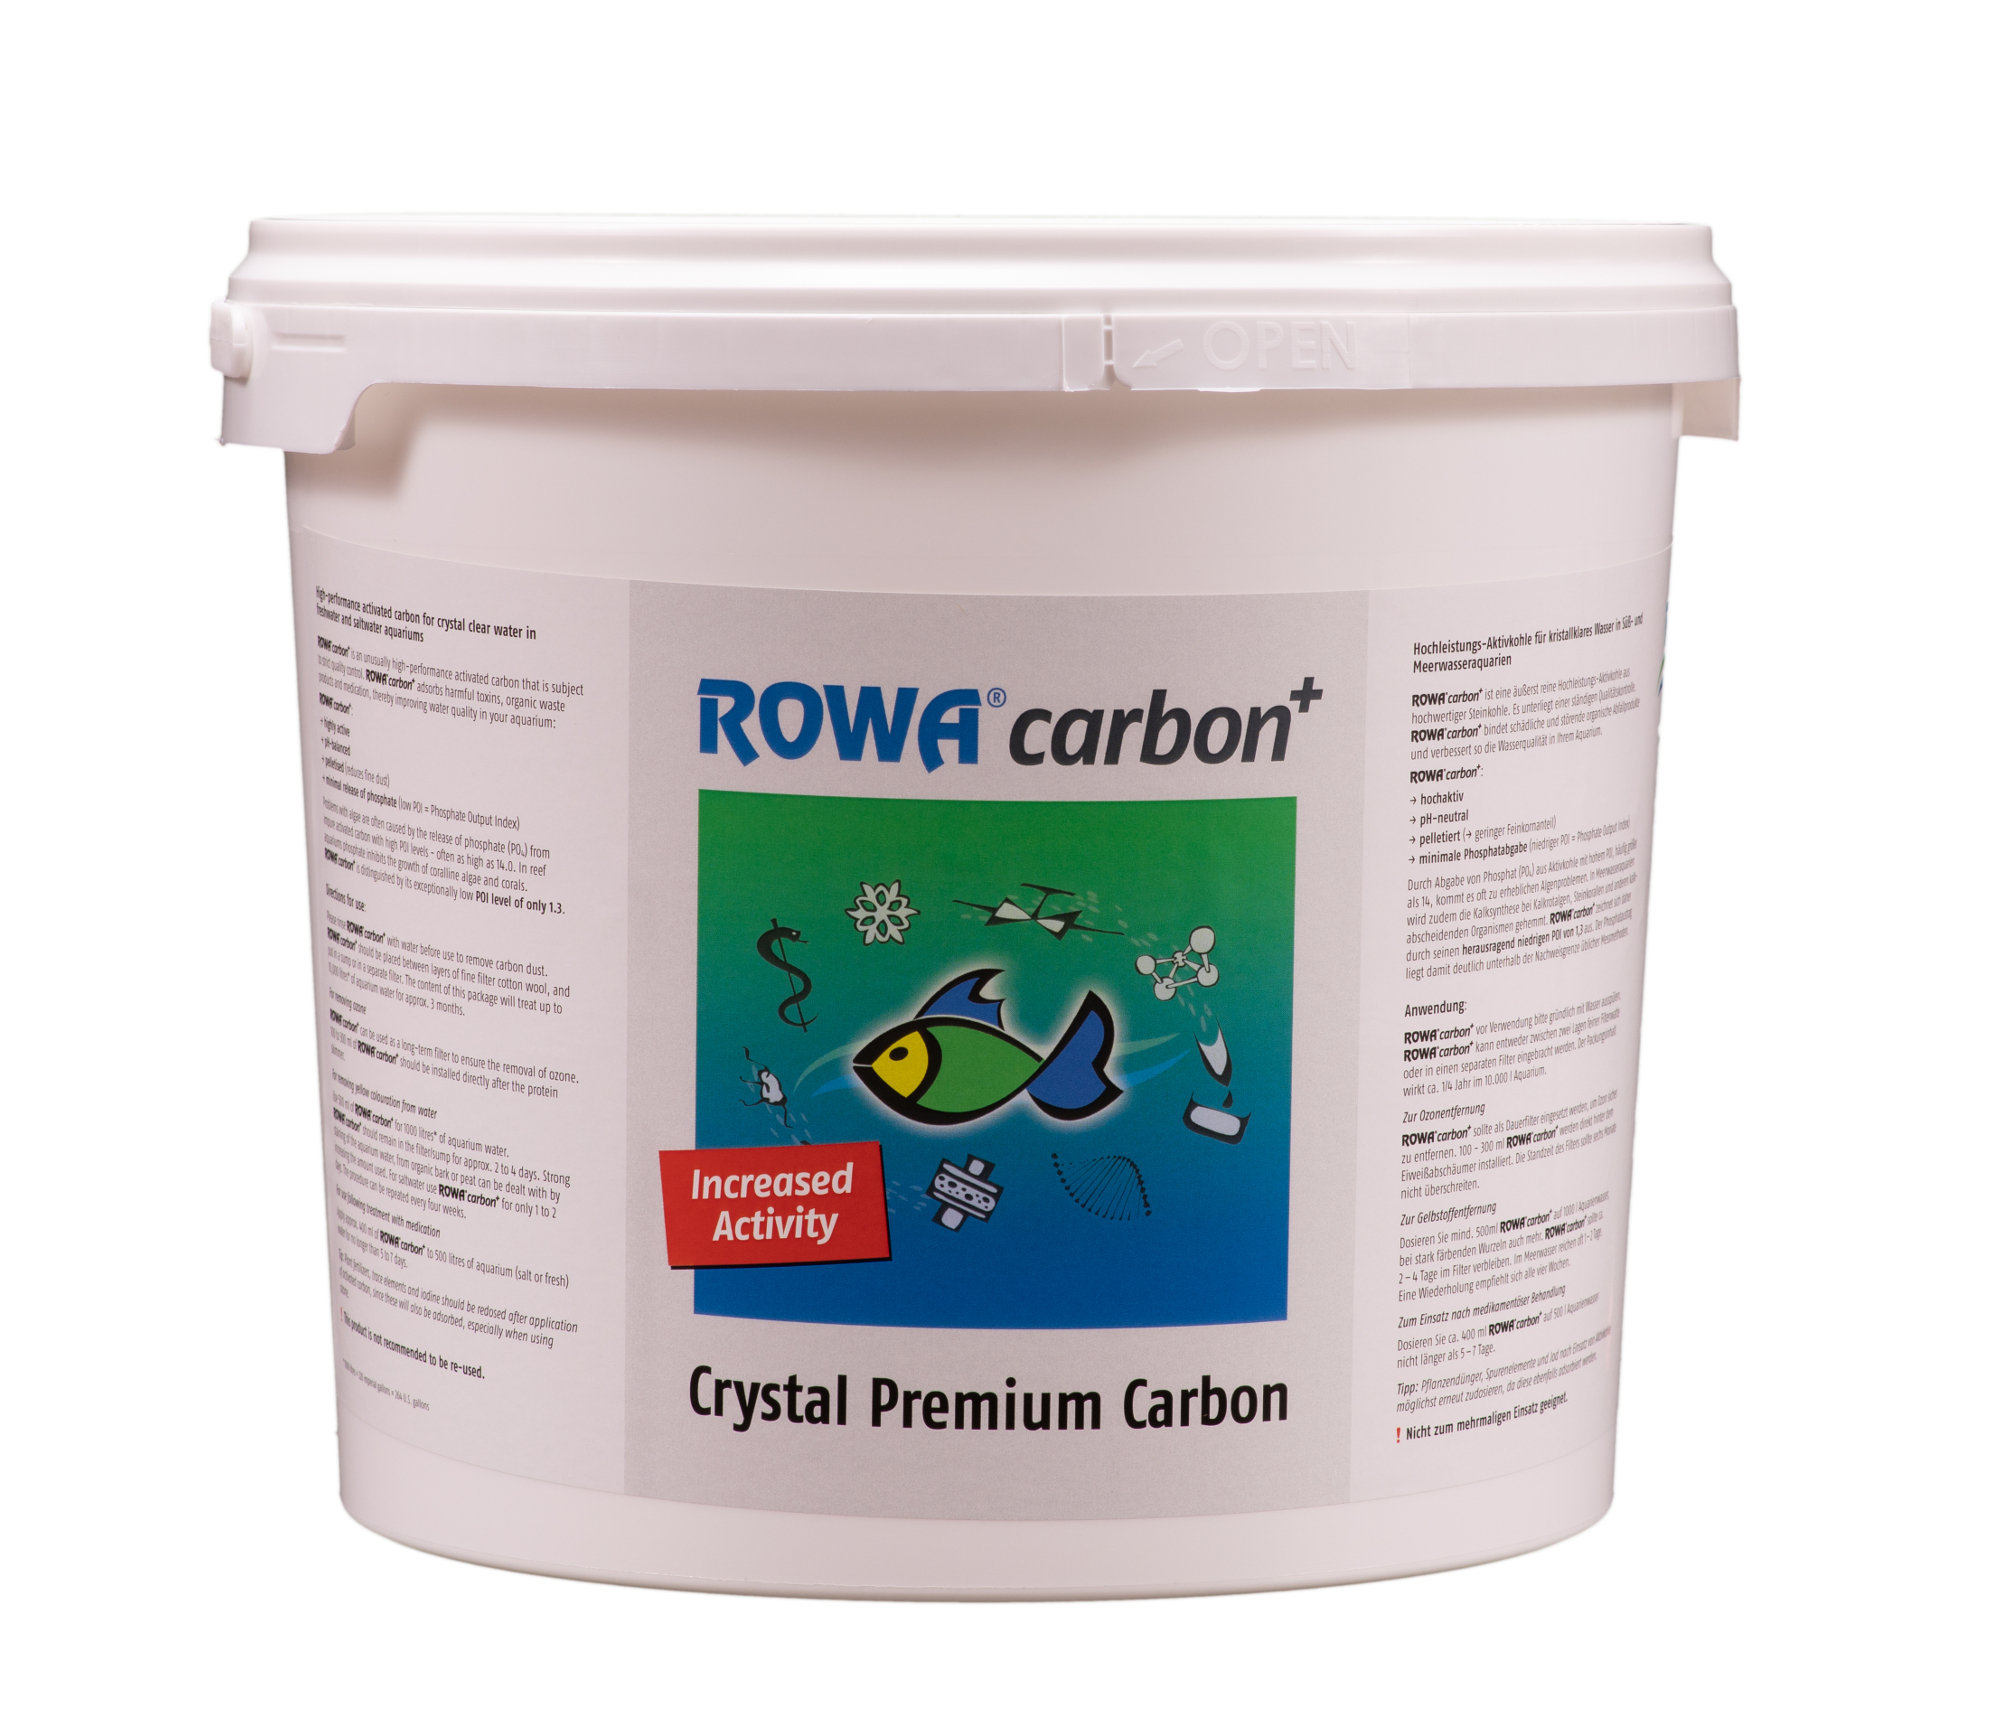 ROWAcarbon⁺: Crystal Premium Carbon - Pelletized high-performance activated  carbon with low POI